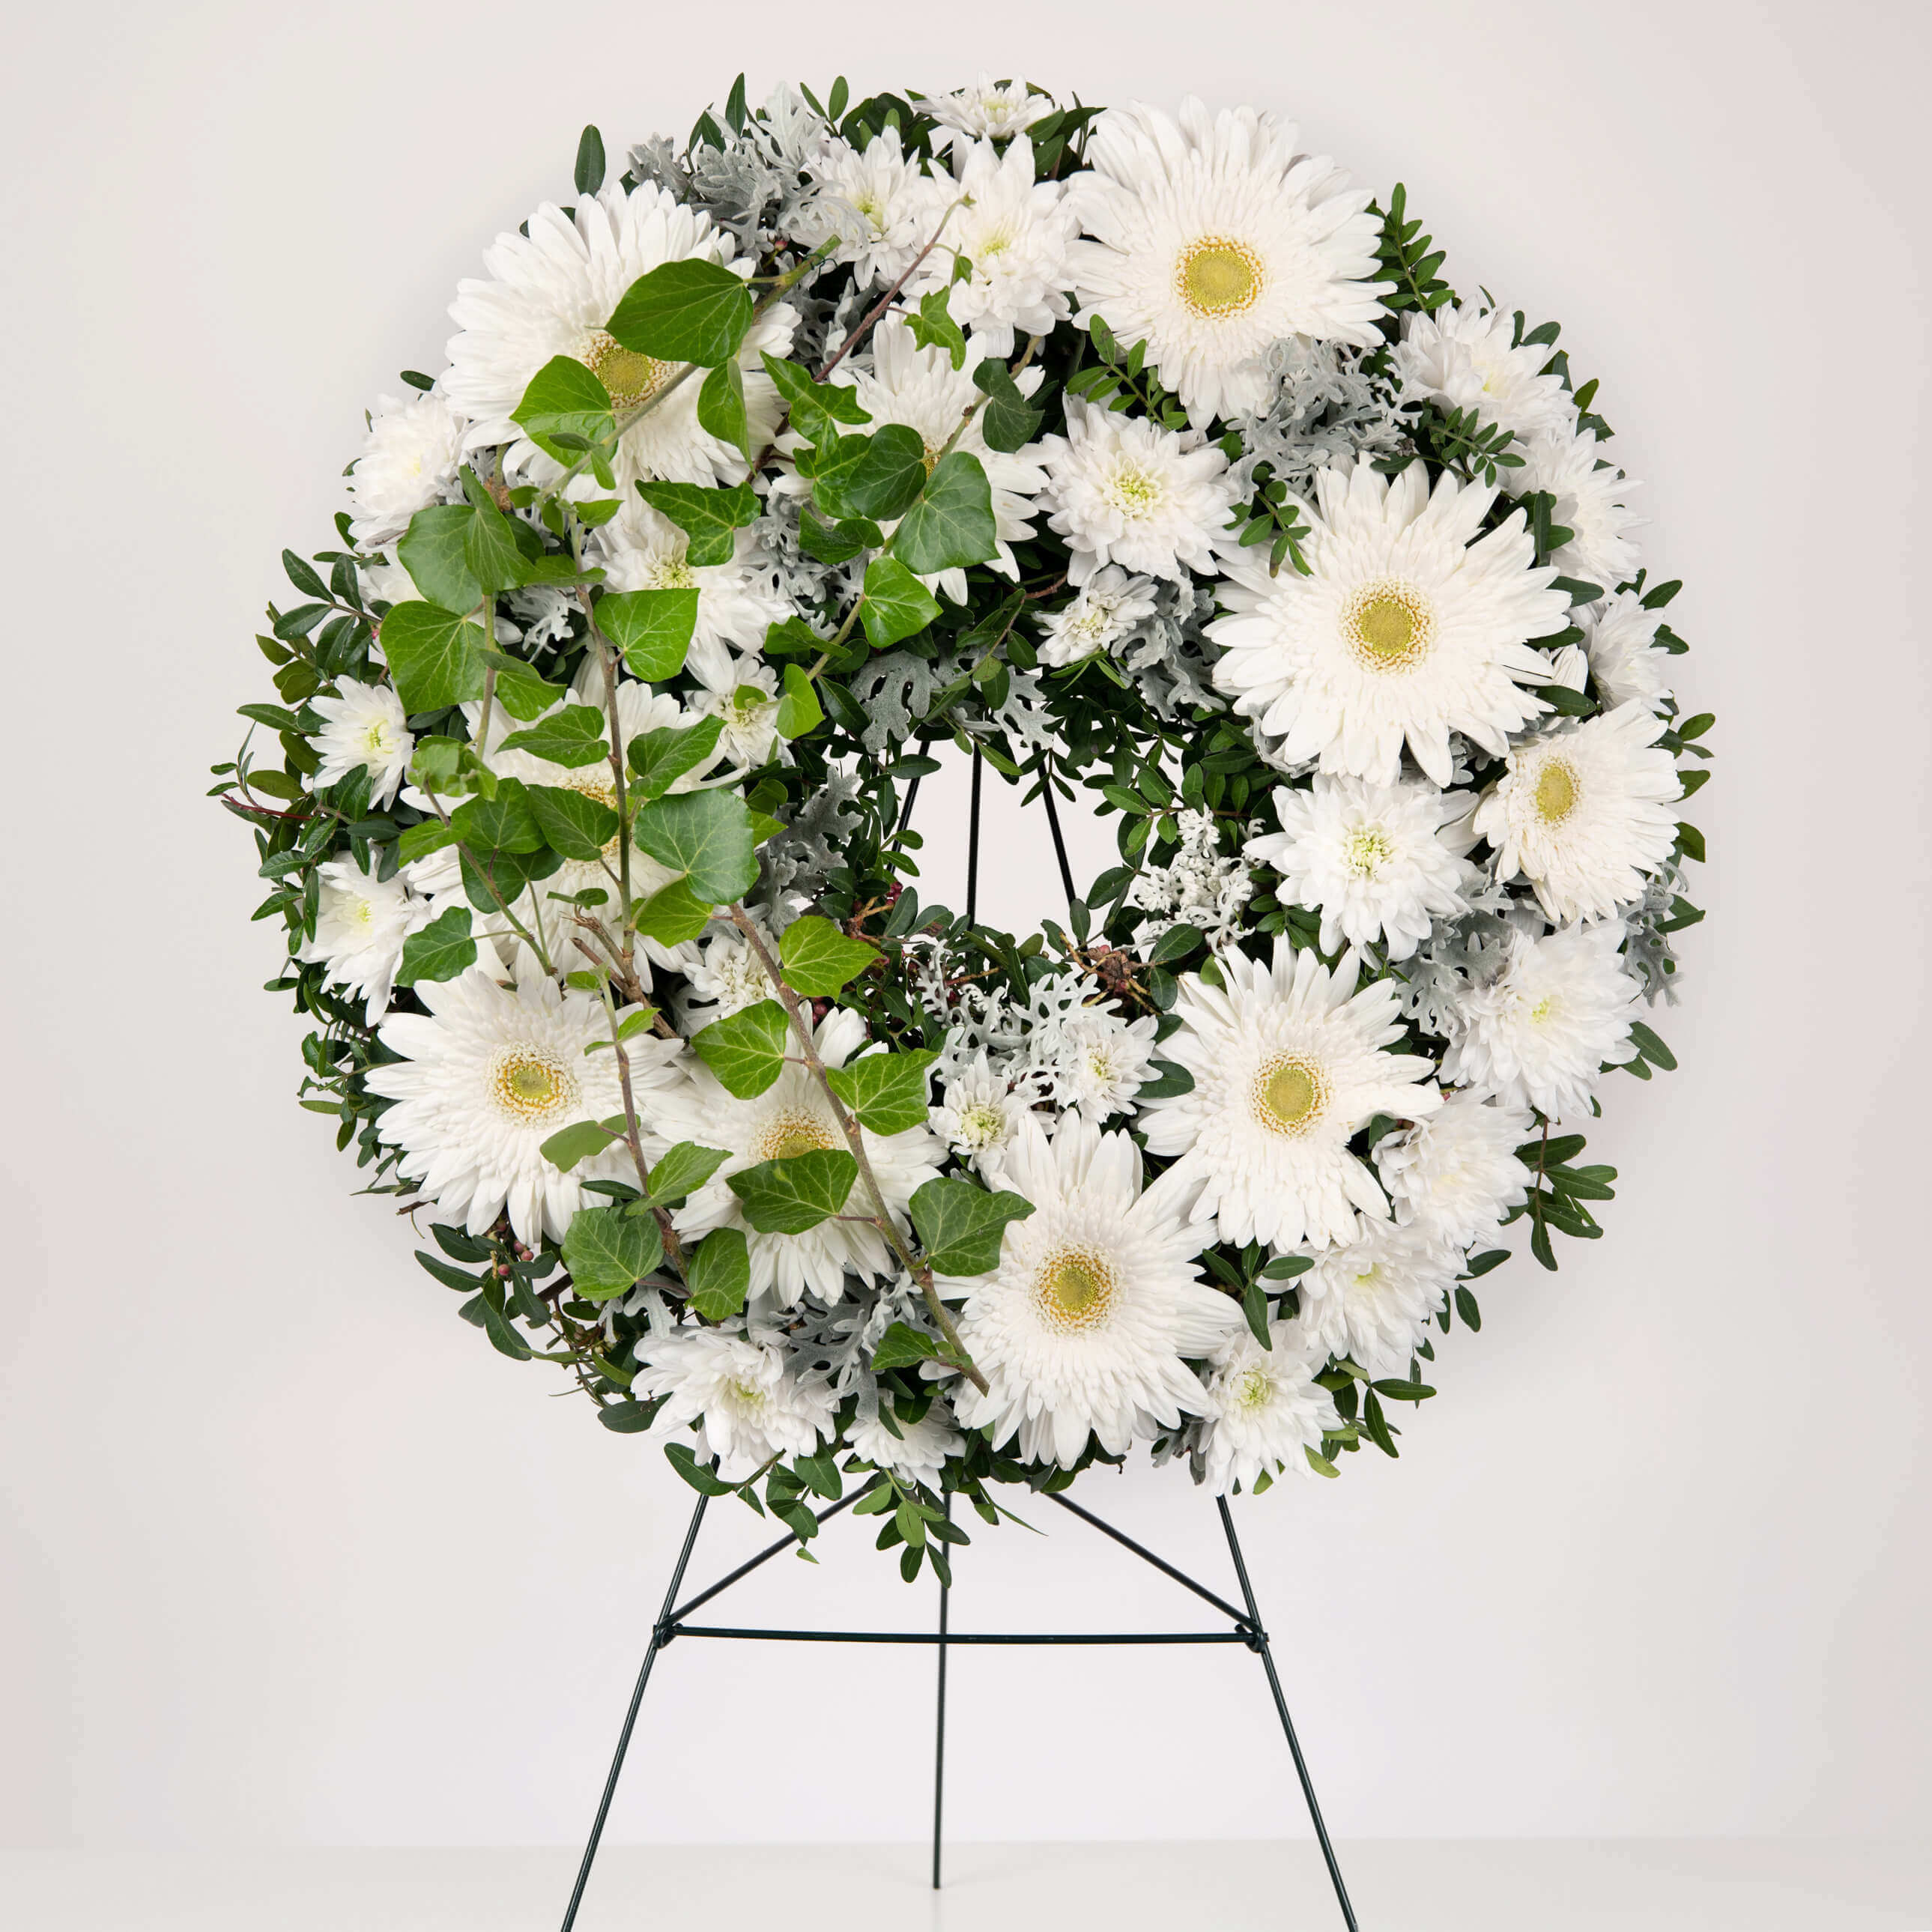 Funeral wreath with gerbera, chrysanthemums and ivy